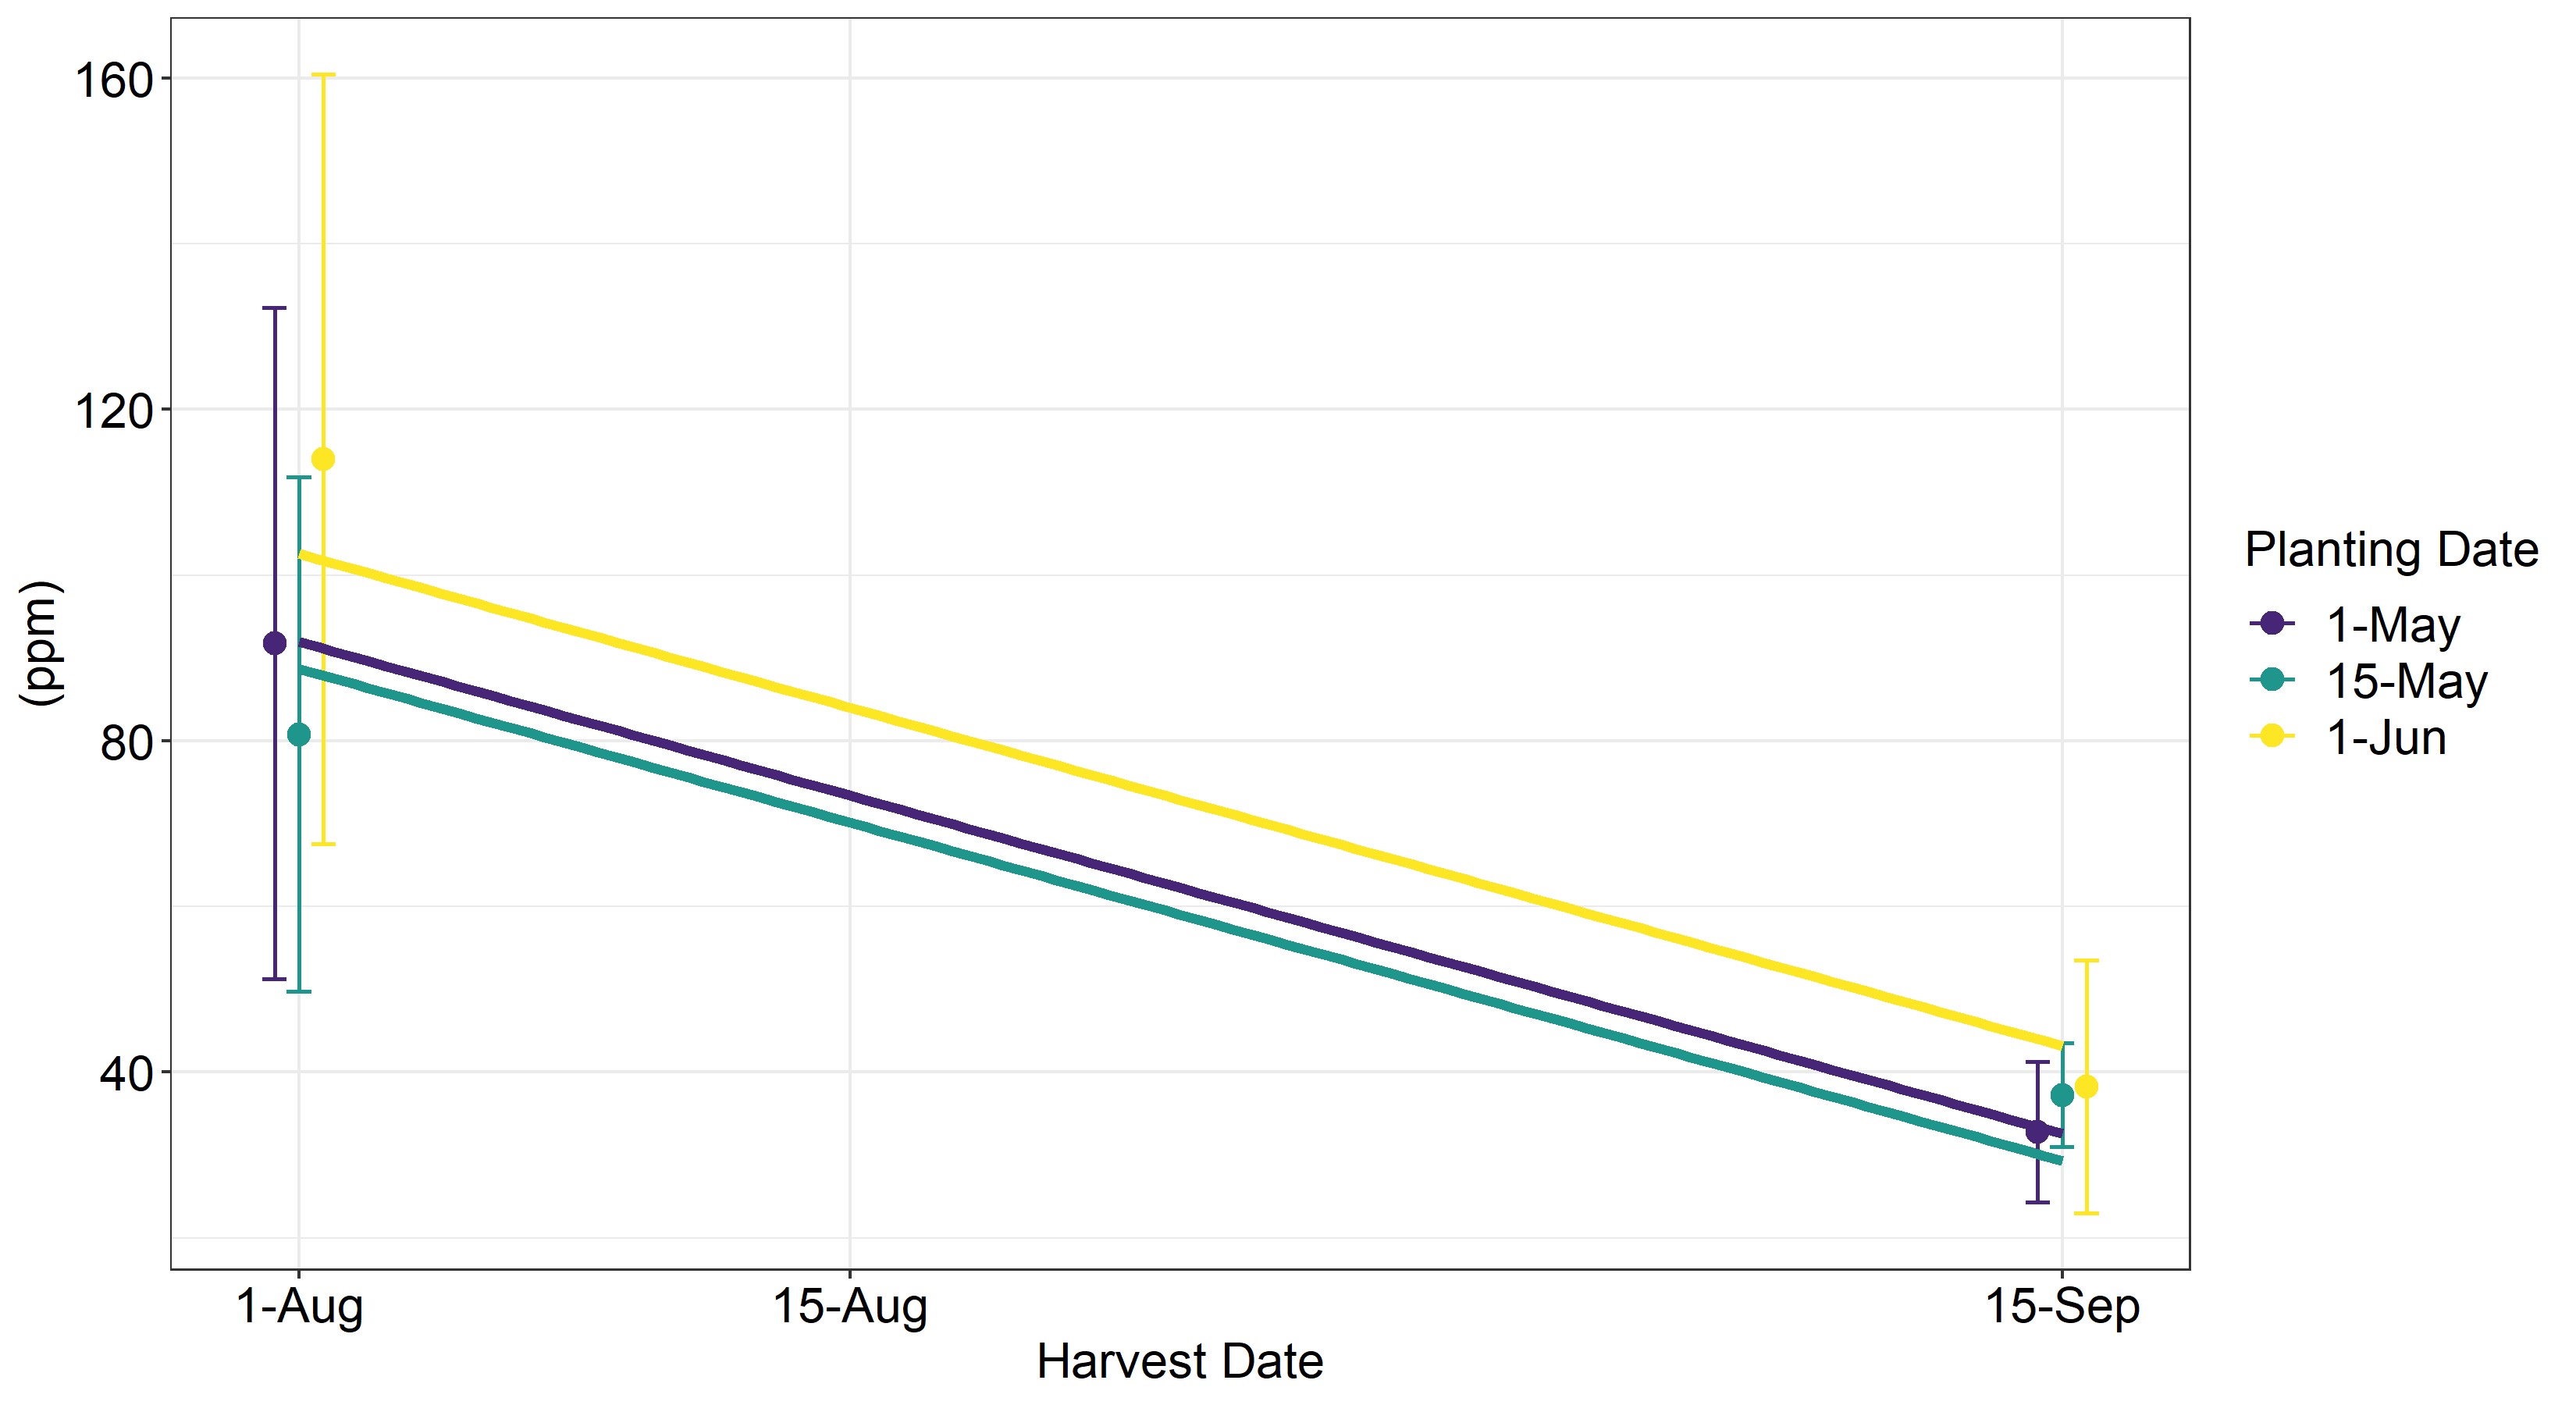 Figure of the nitrate content in ppm over harvest date